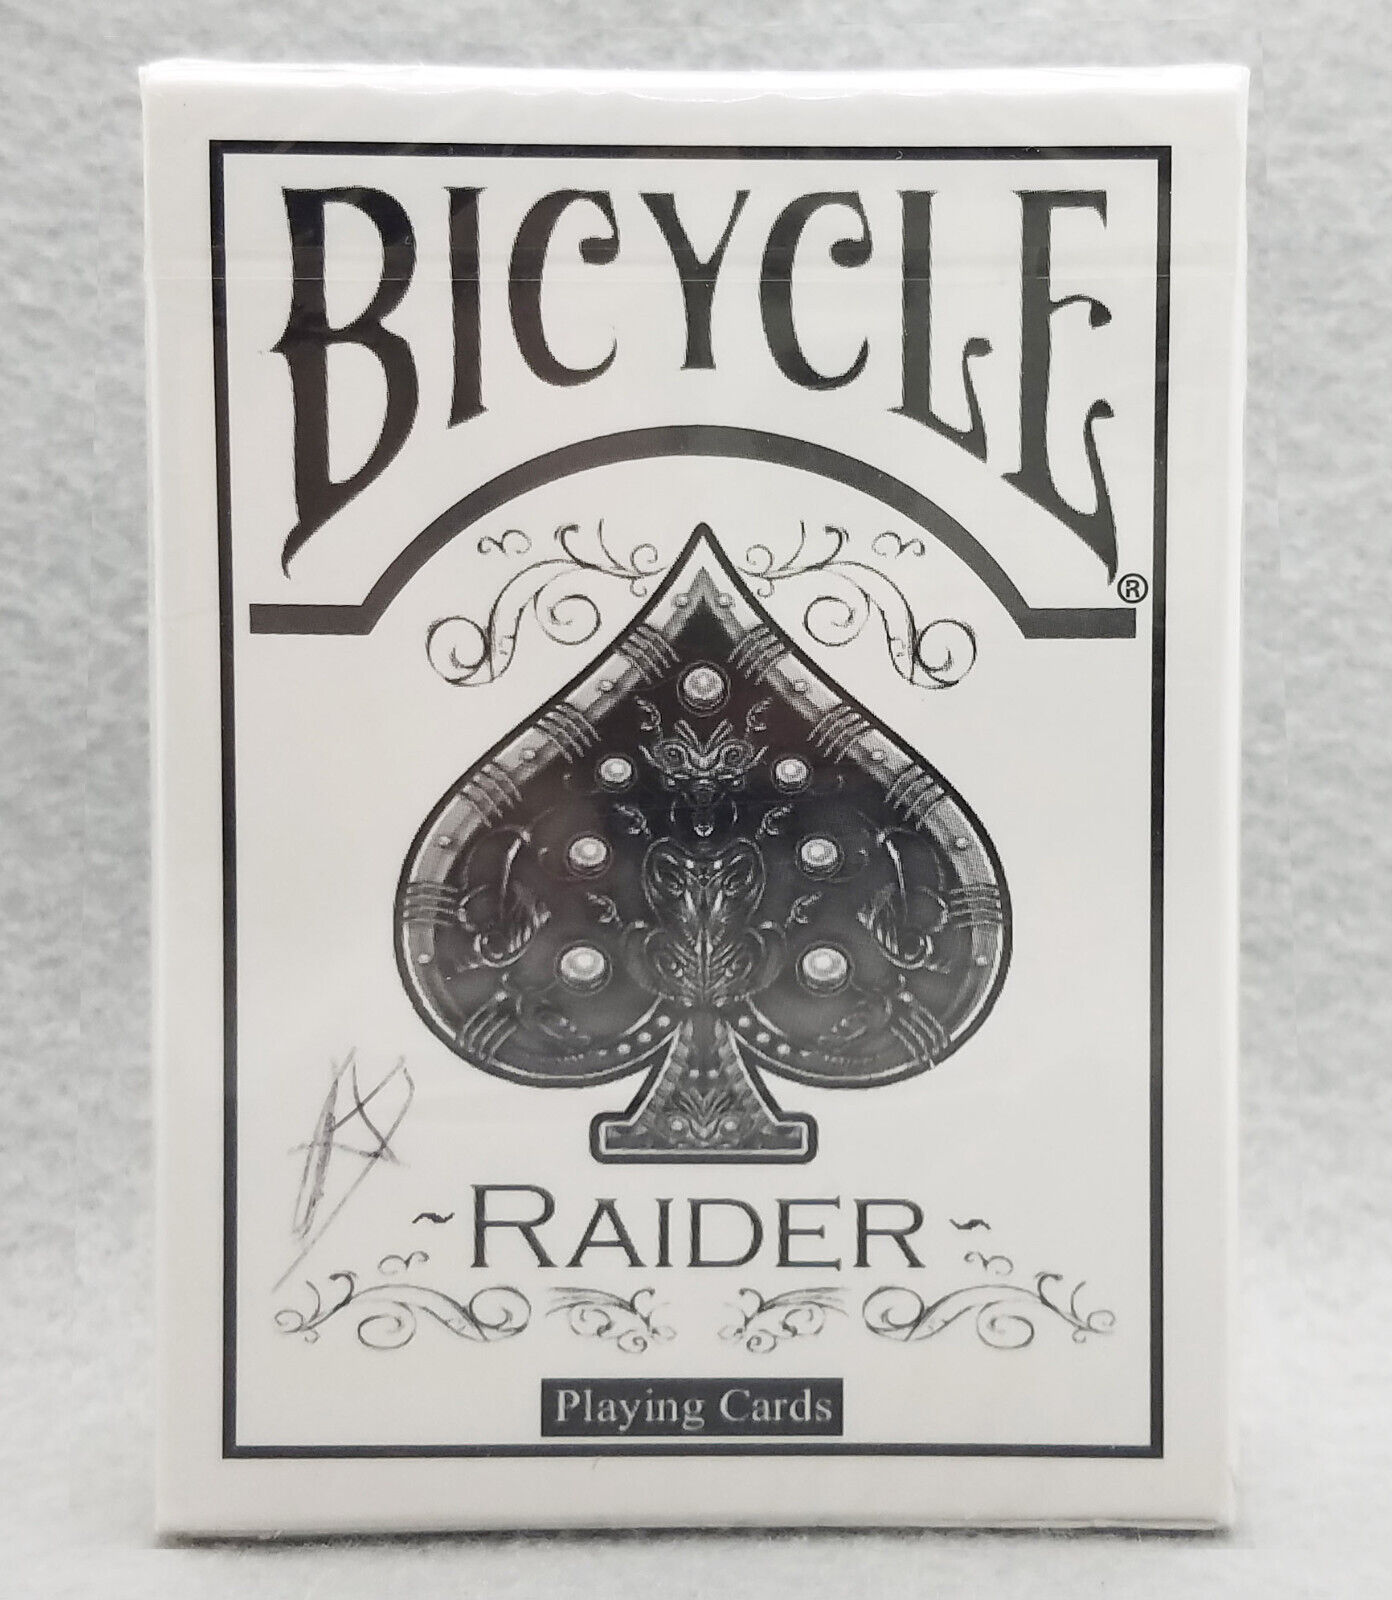 Bicycle White Raider Playing Cards 1-Deck New